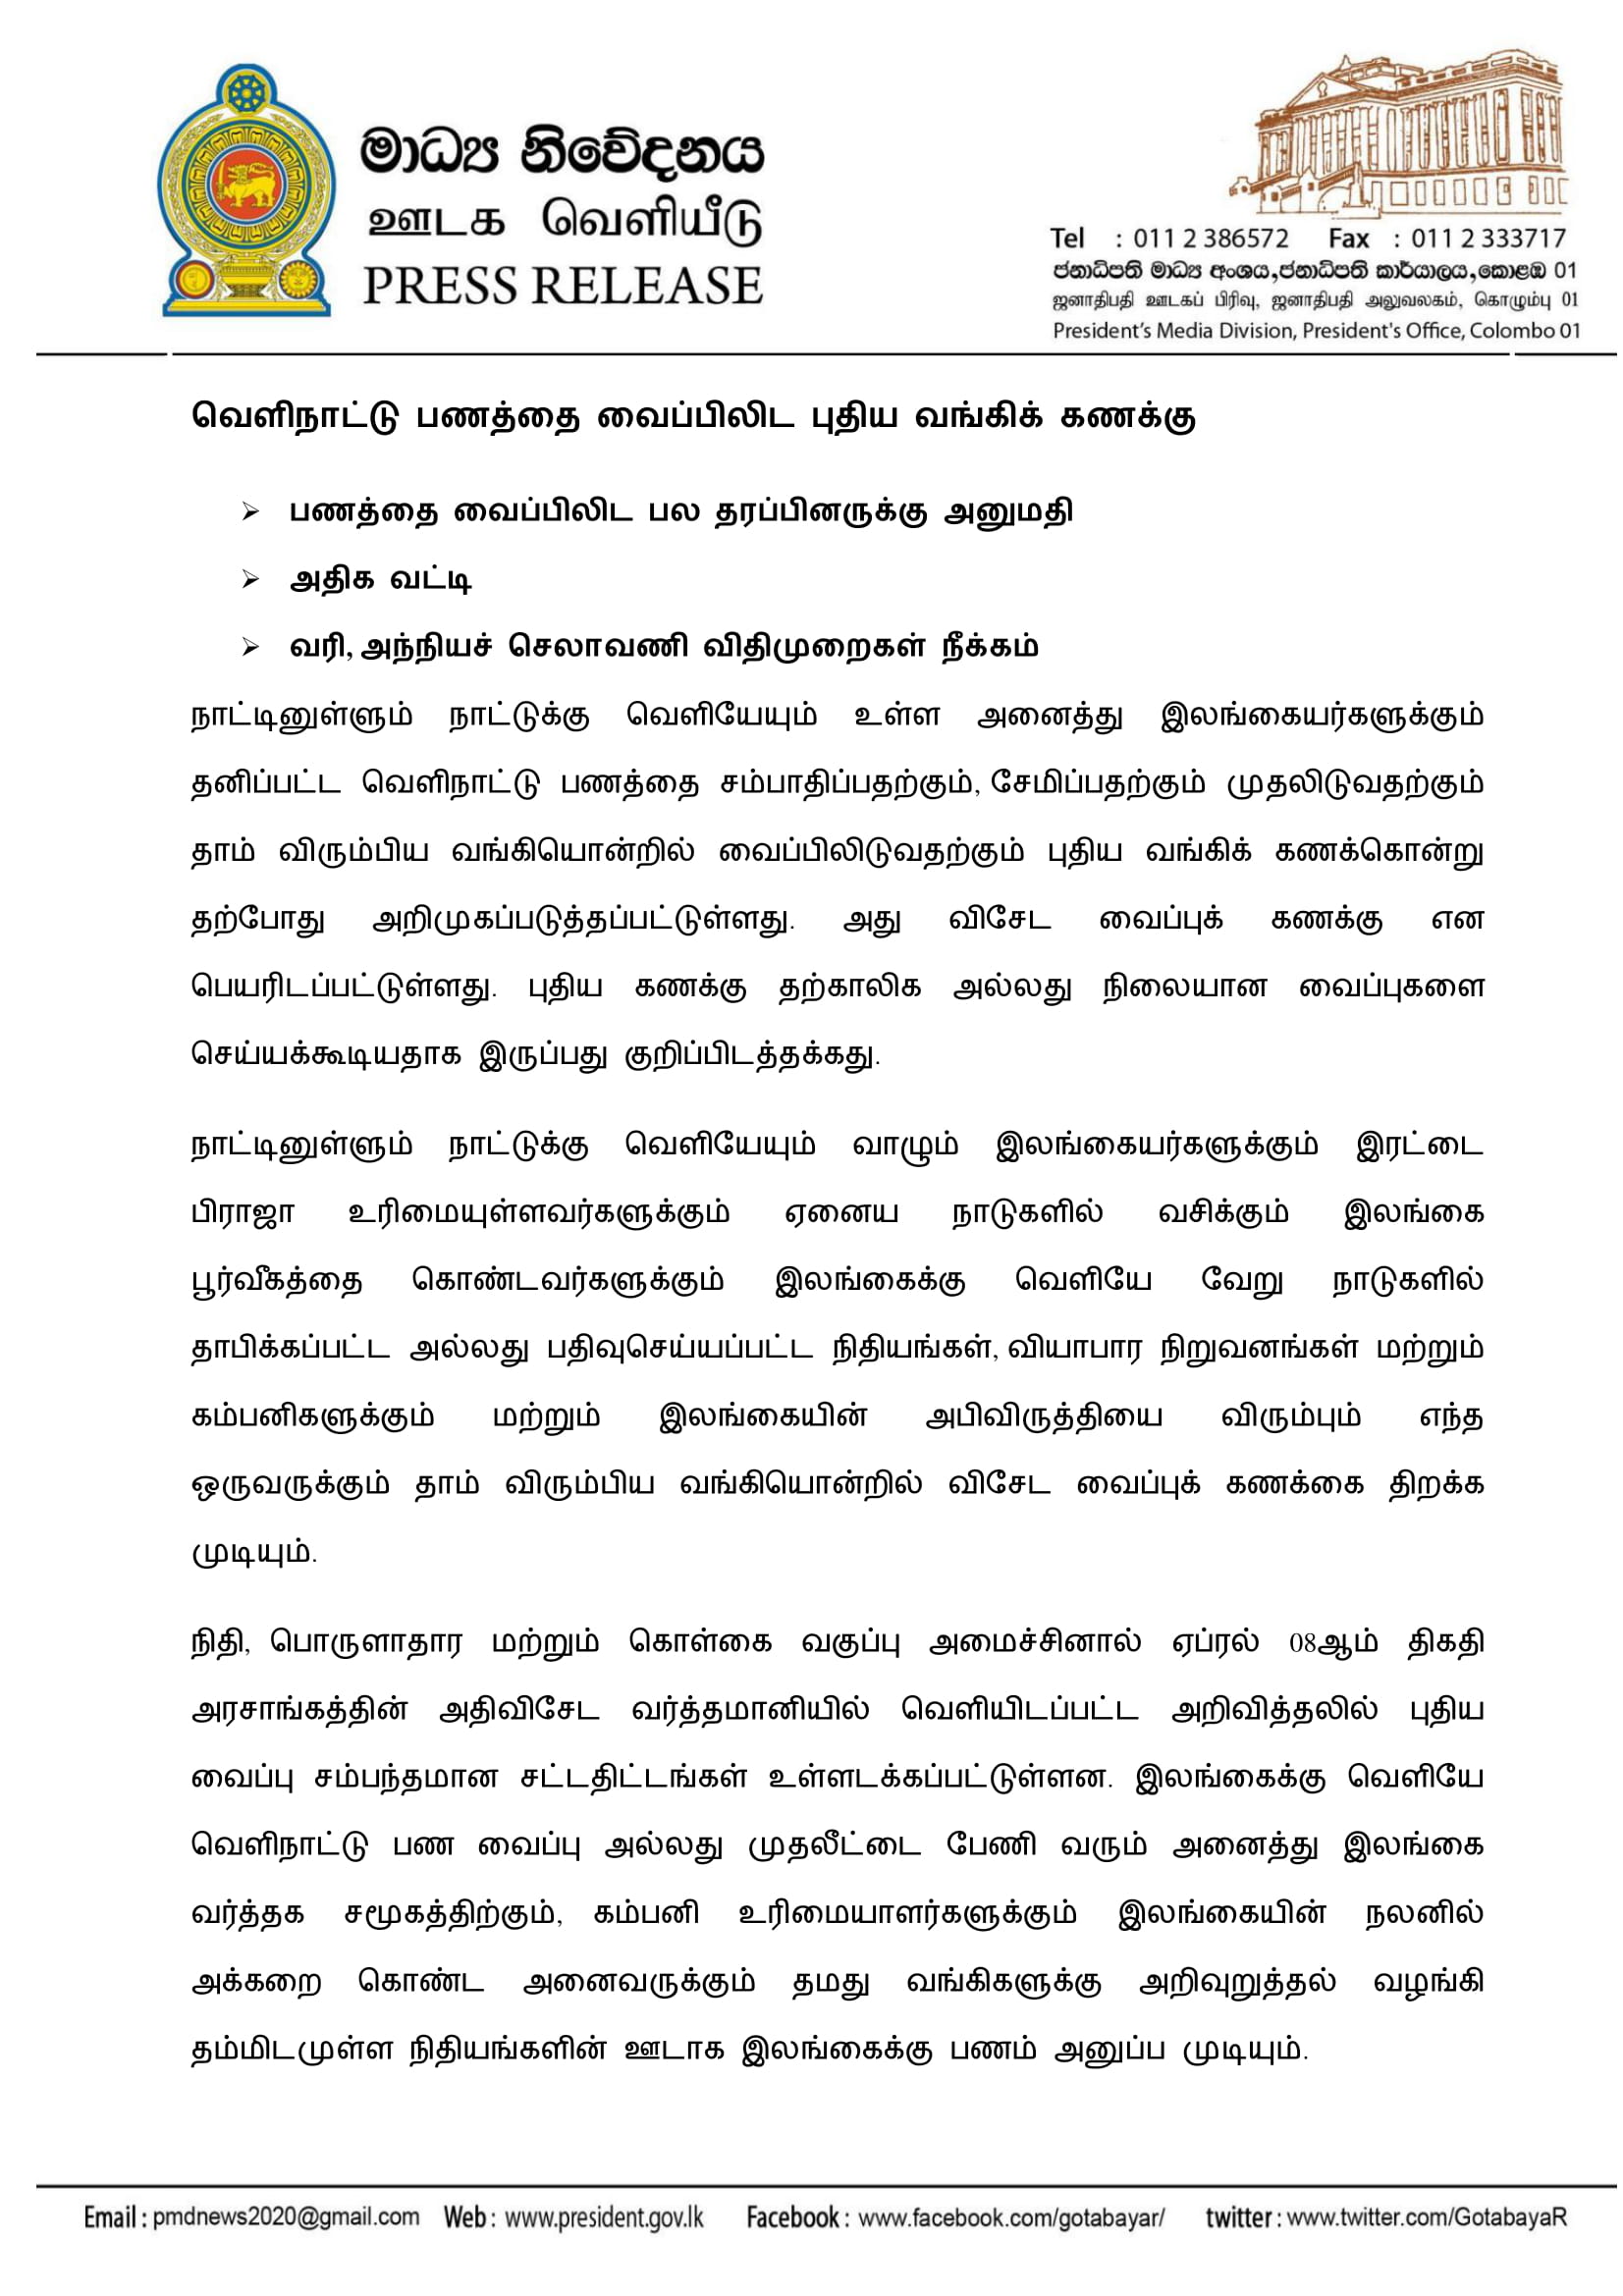 Tamil Release (A new bank account introduced to deposit foreign cash) 11.04.2020-1